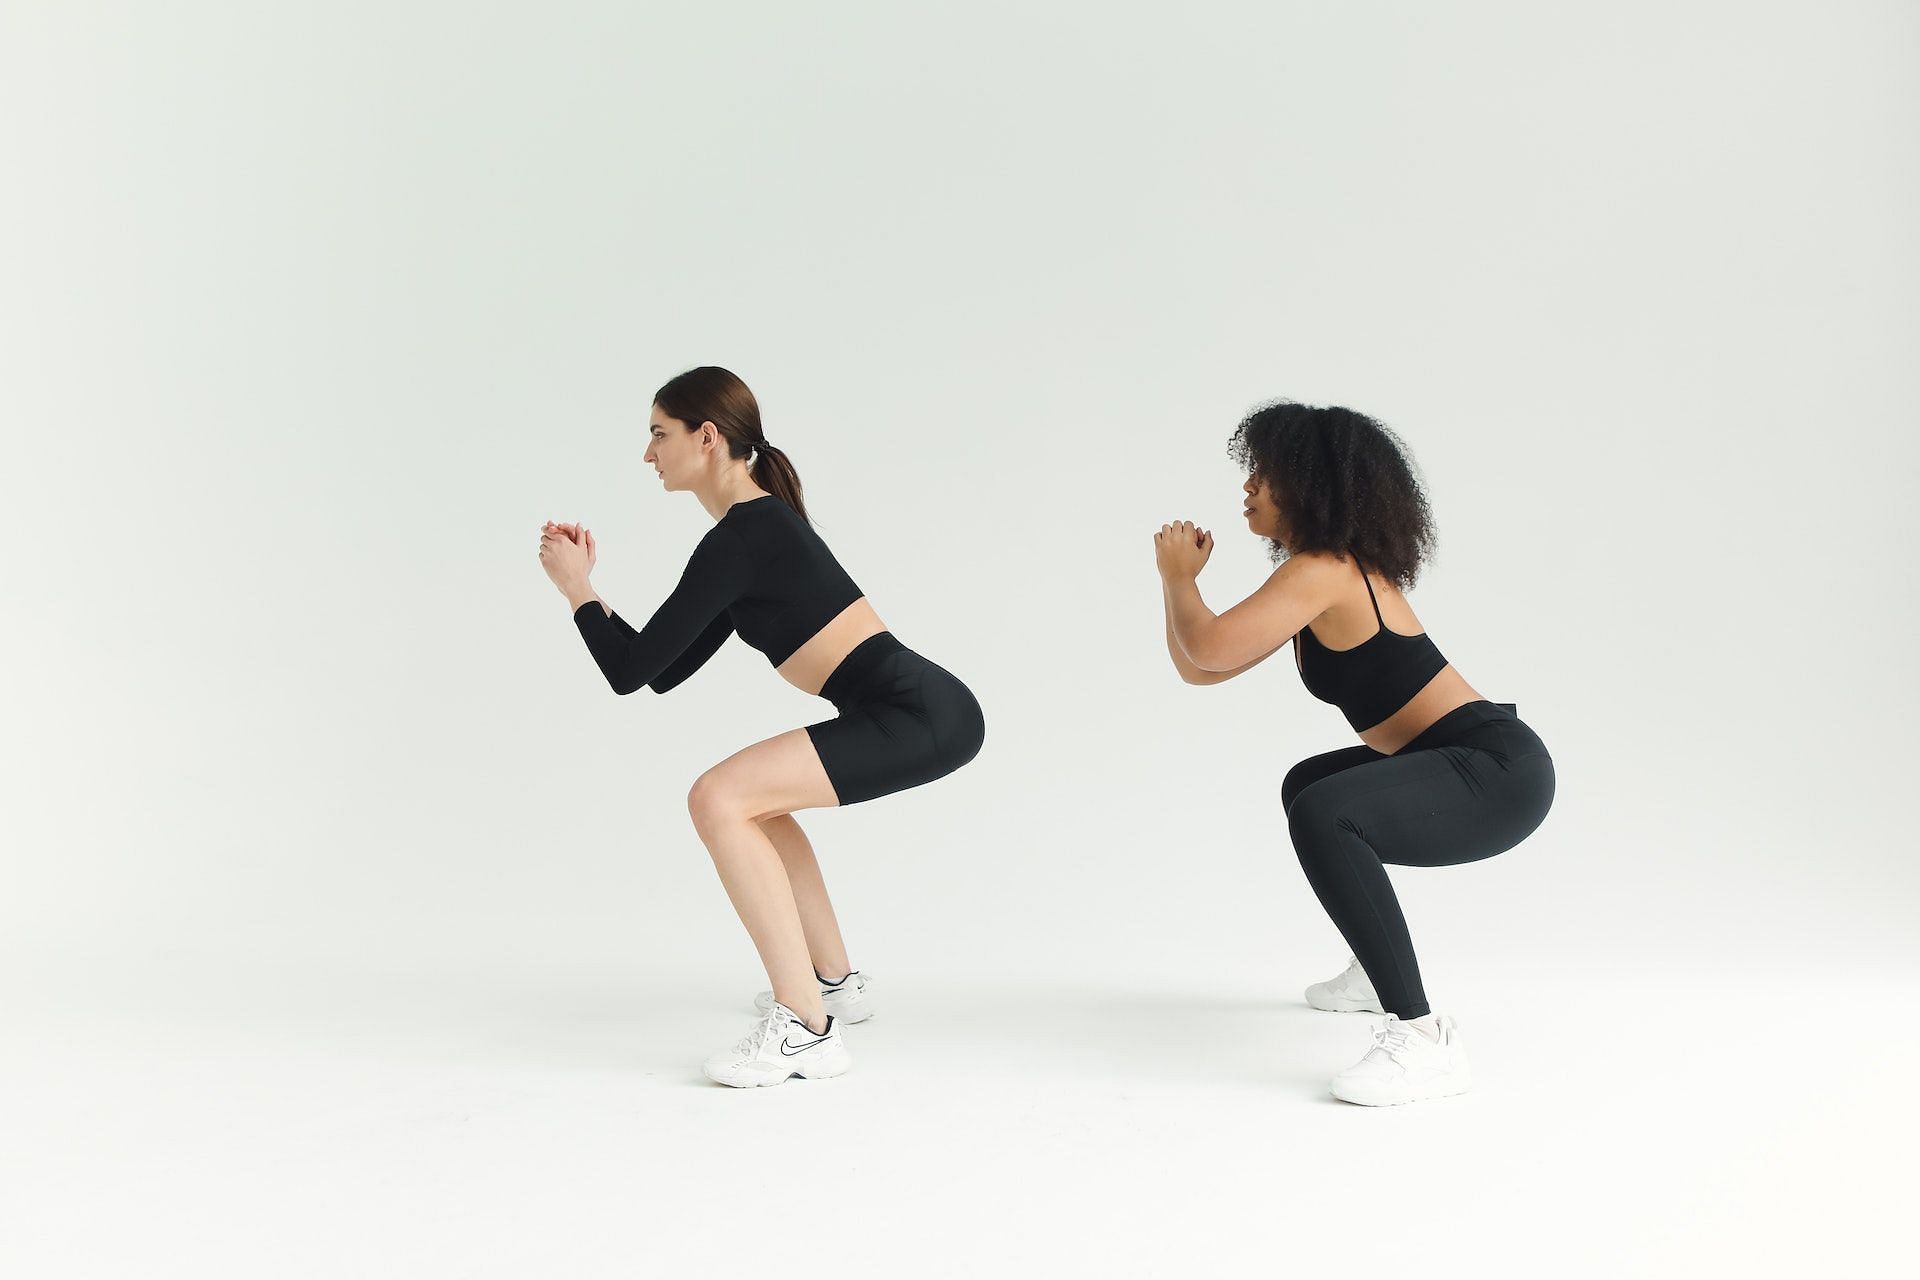 An 8-Move Barre Workout That Targets Your Butt and Thighs